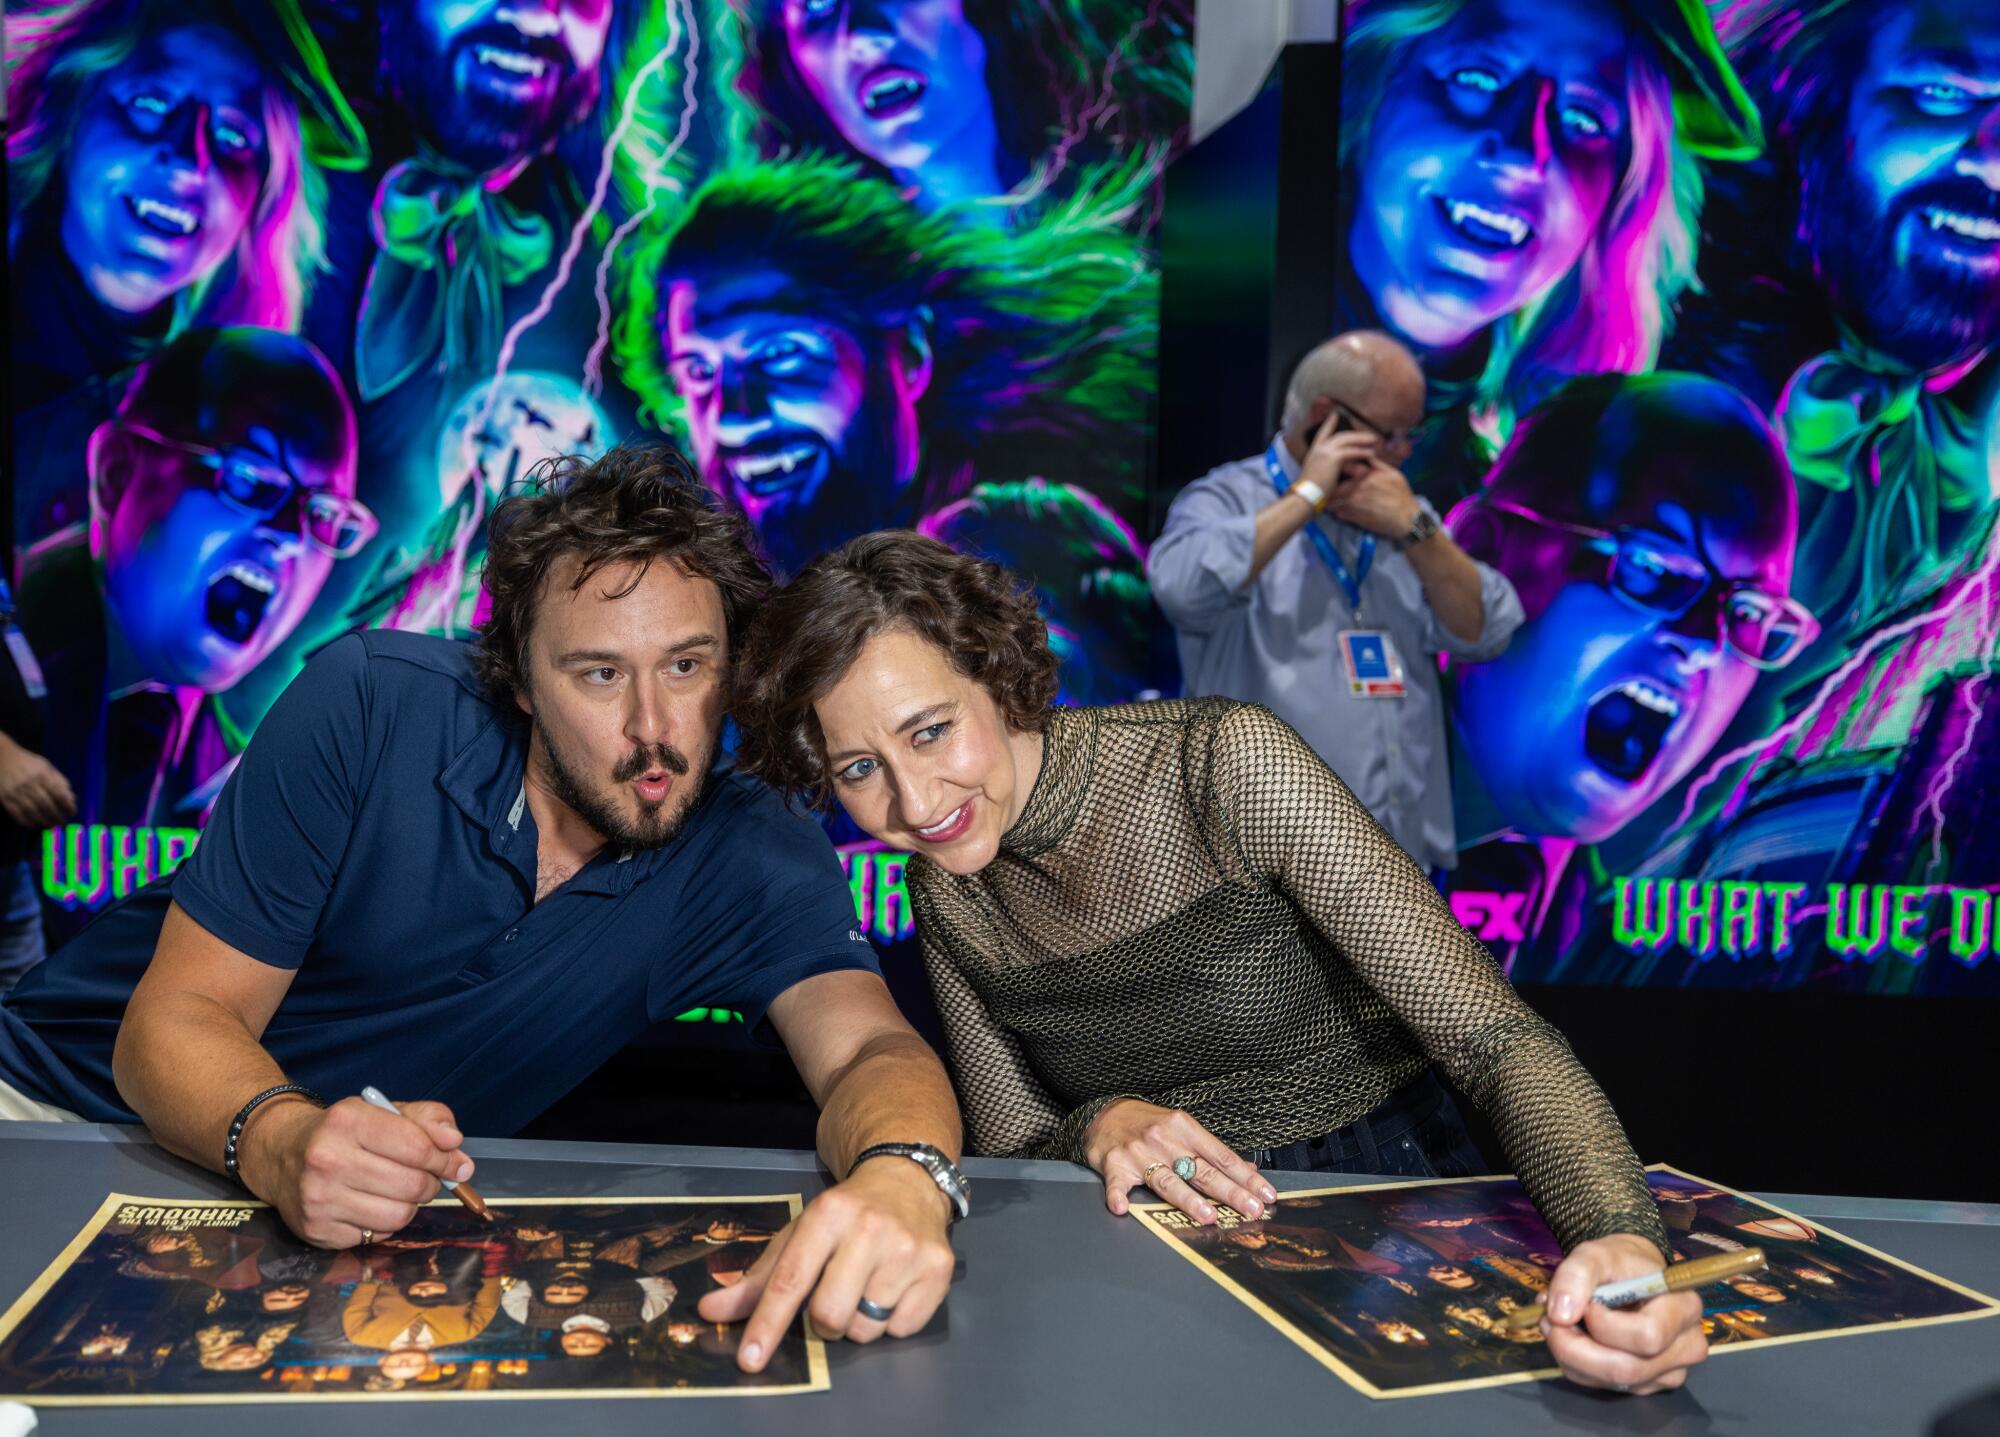 Actor Kristen Schaal, right, as "the guide", poses for a photo with Kyle Newacheck.